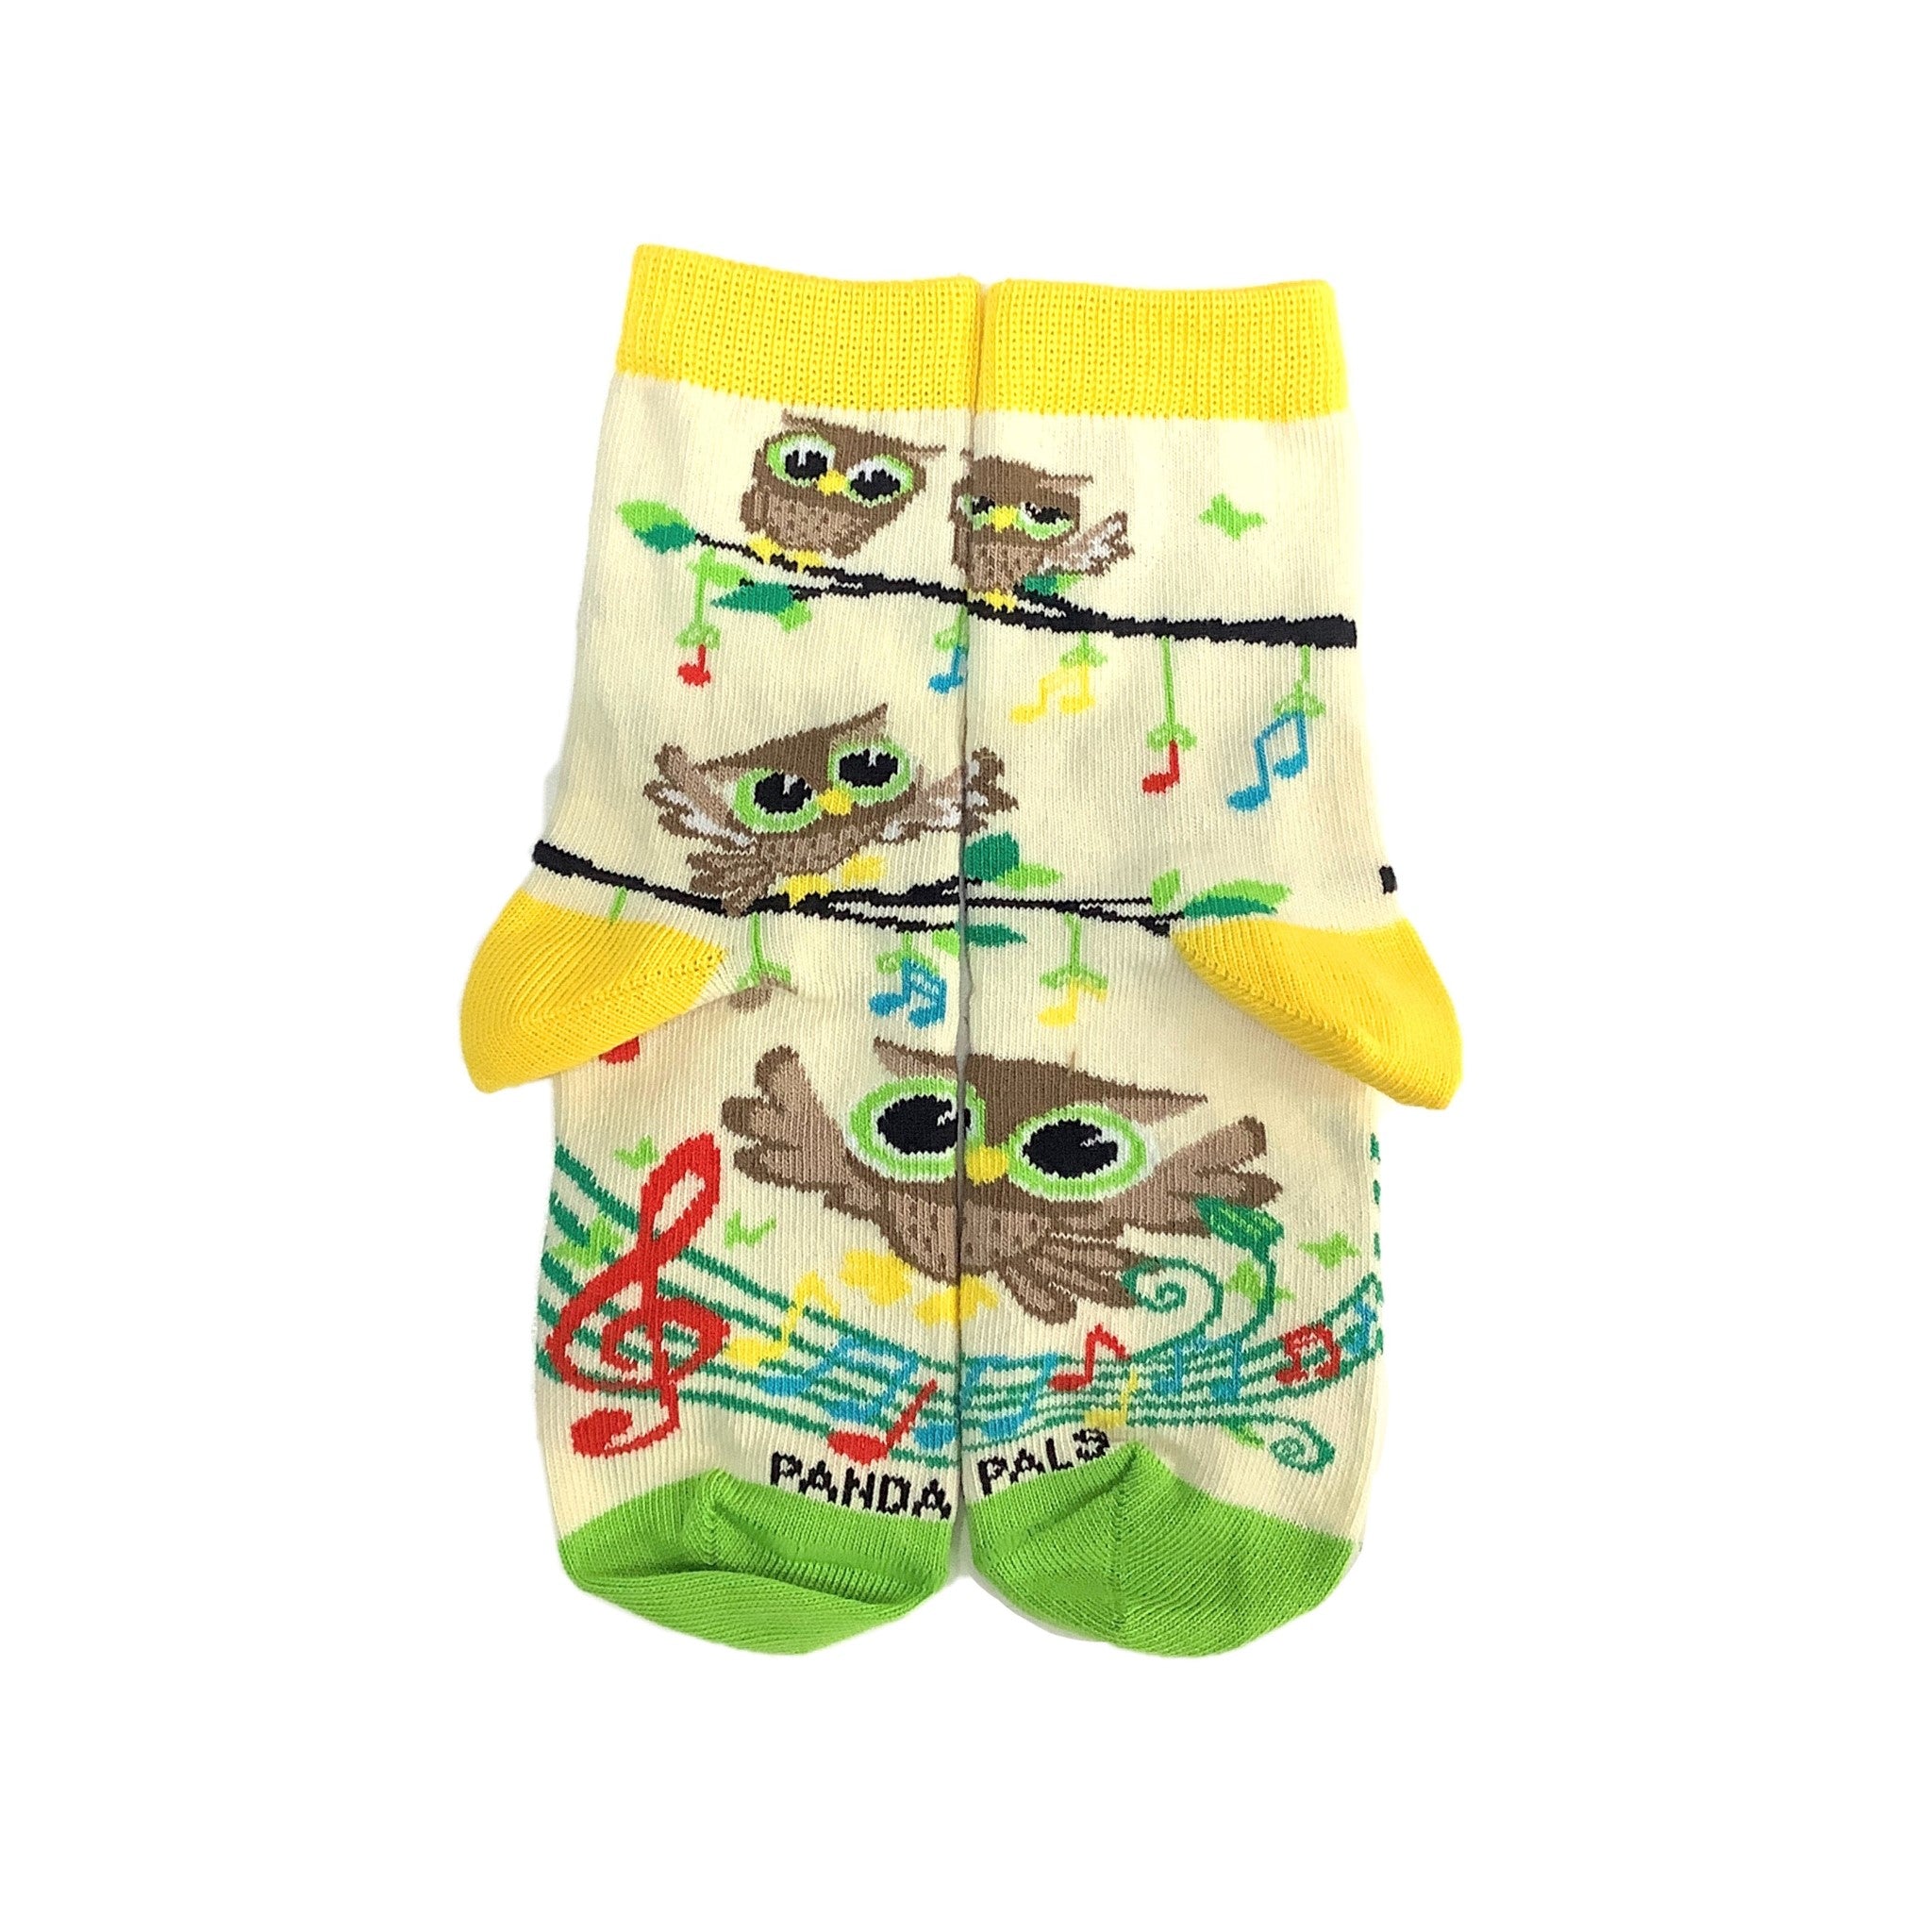 Magical Owls Socks (Set of Two) (Ages 3-7) from the Sock Panda